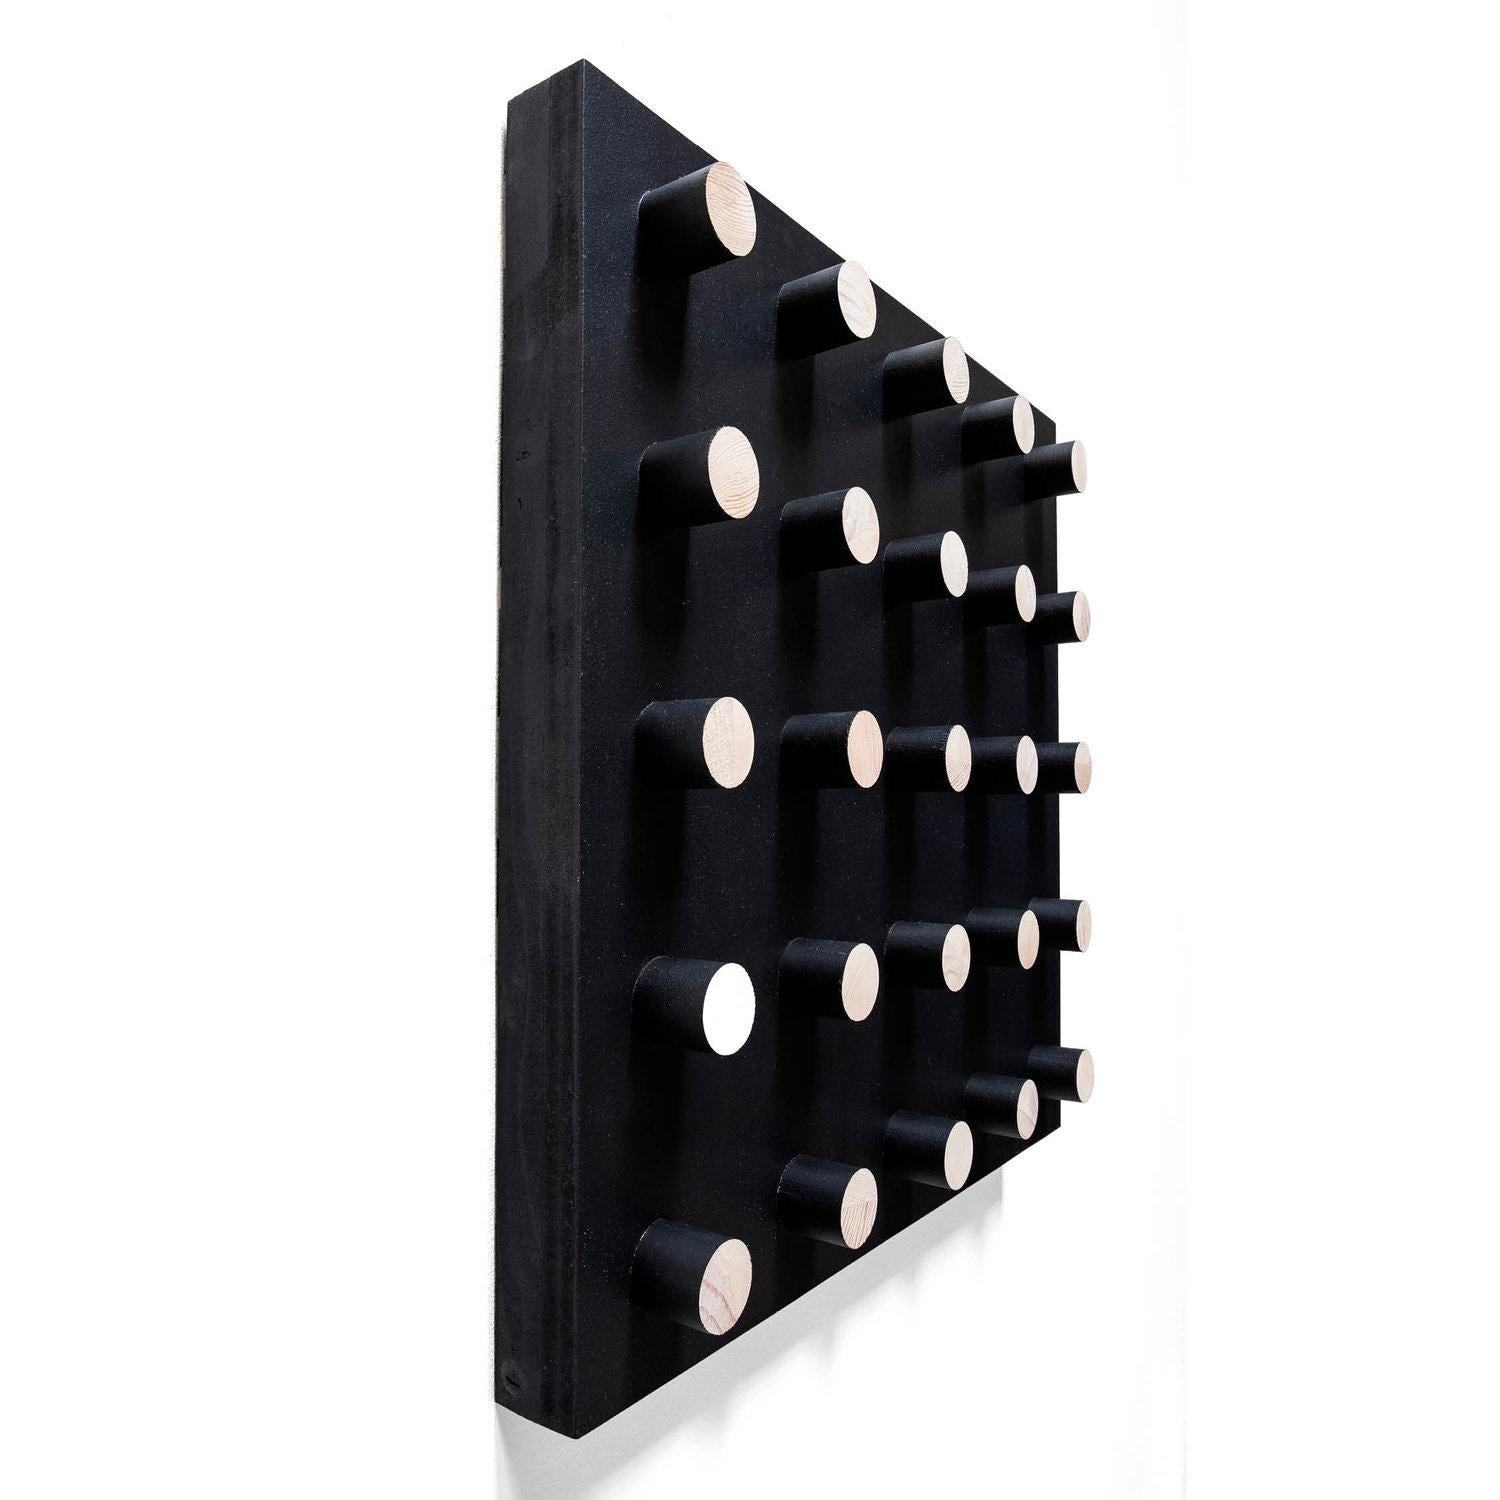 Peg work - black square
painted wood
Measures: 30” x 30” x 3.5” 
2018

Produced by hand in Los Angeles, CA.


    